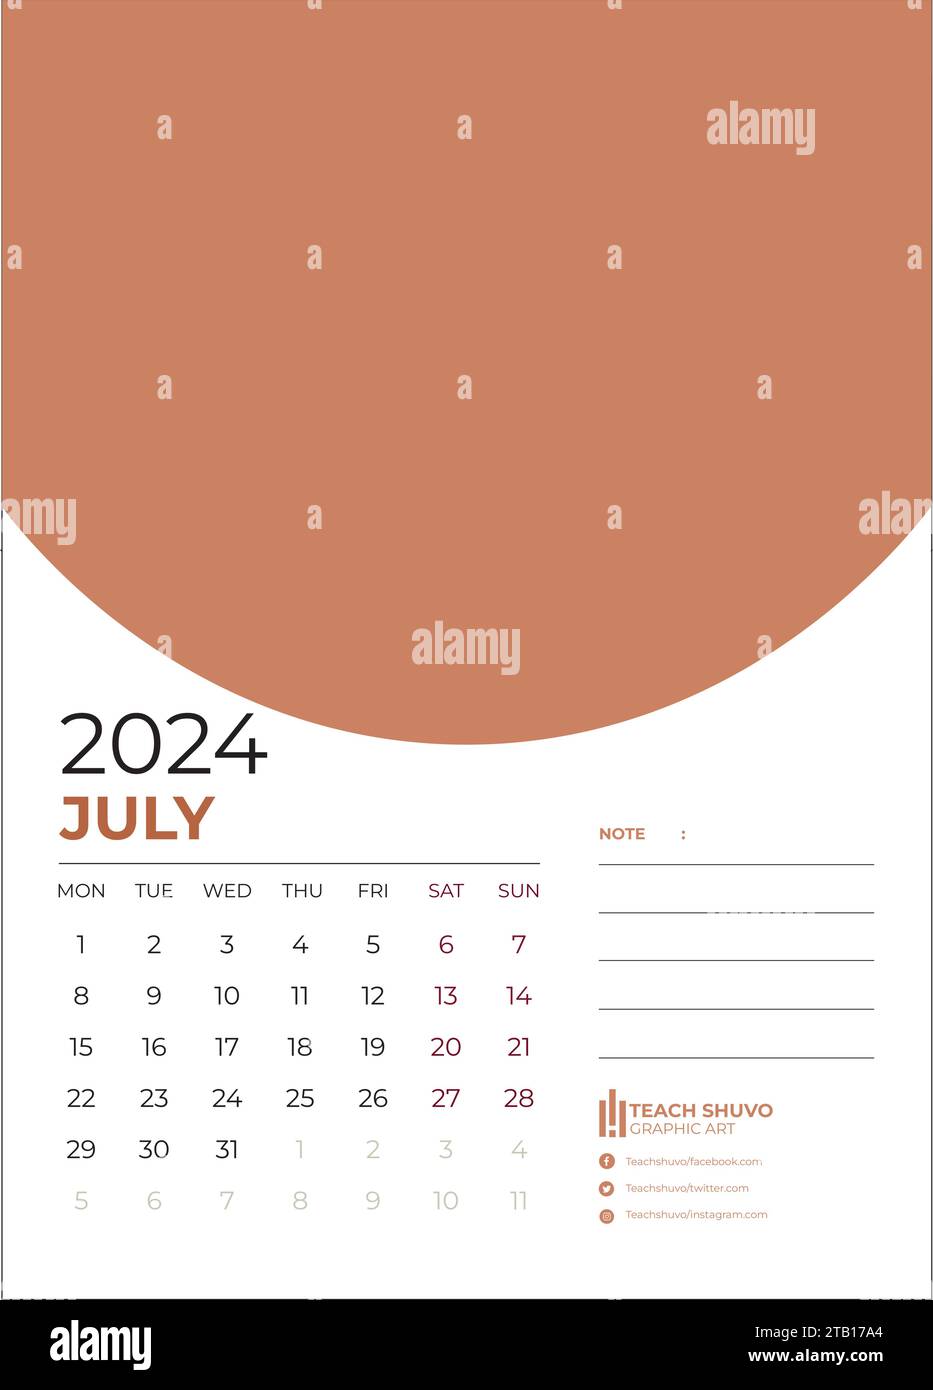 Calendar template for 2024 year. Wall calendar grid in a minimalist style. Week Starts on Monday. Stock Vector